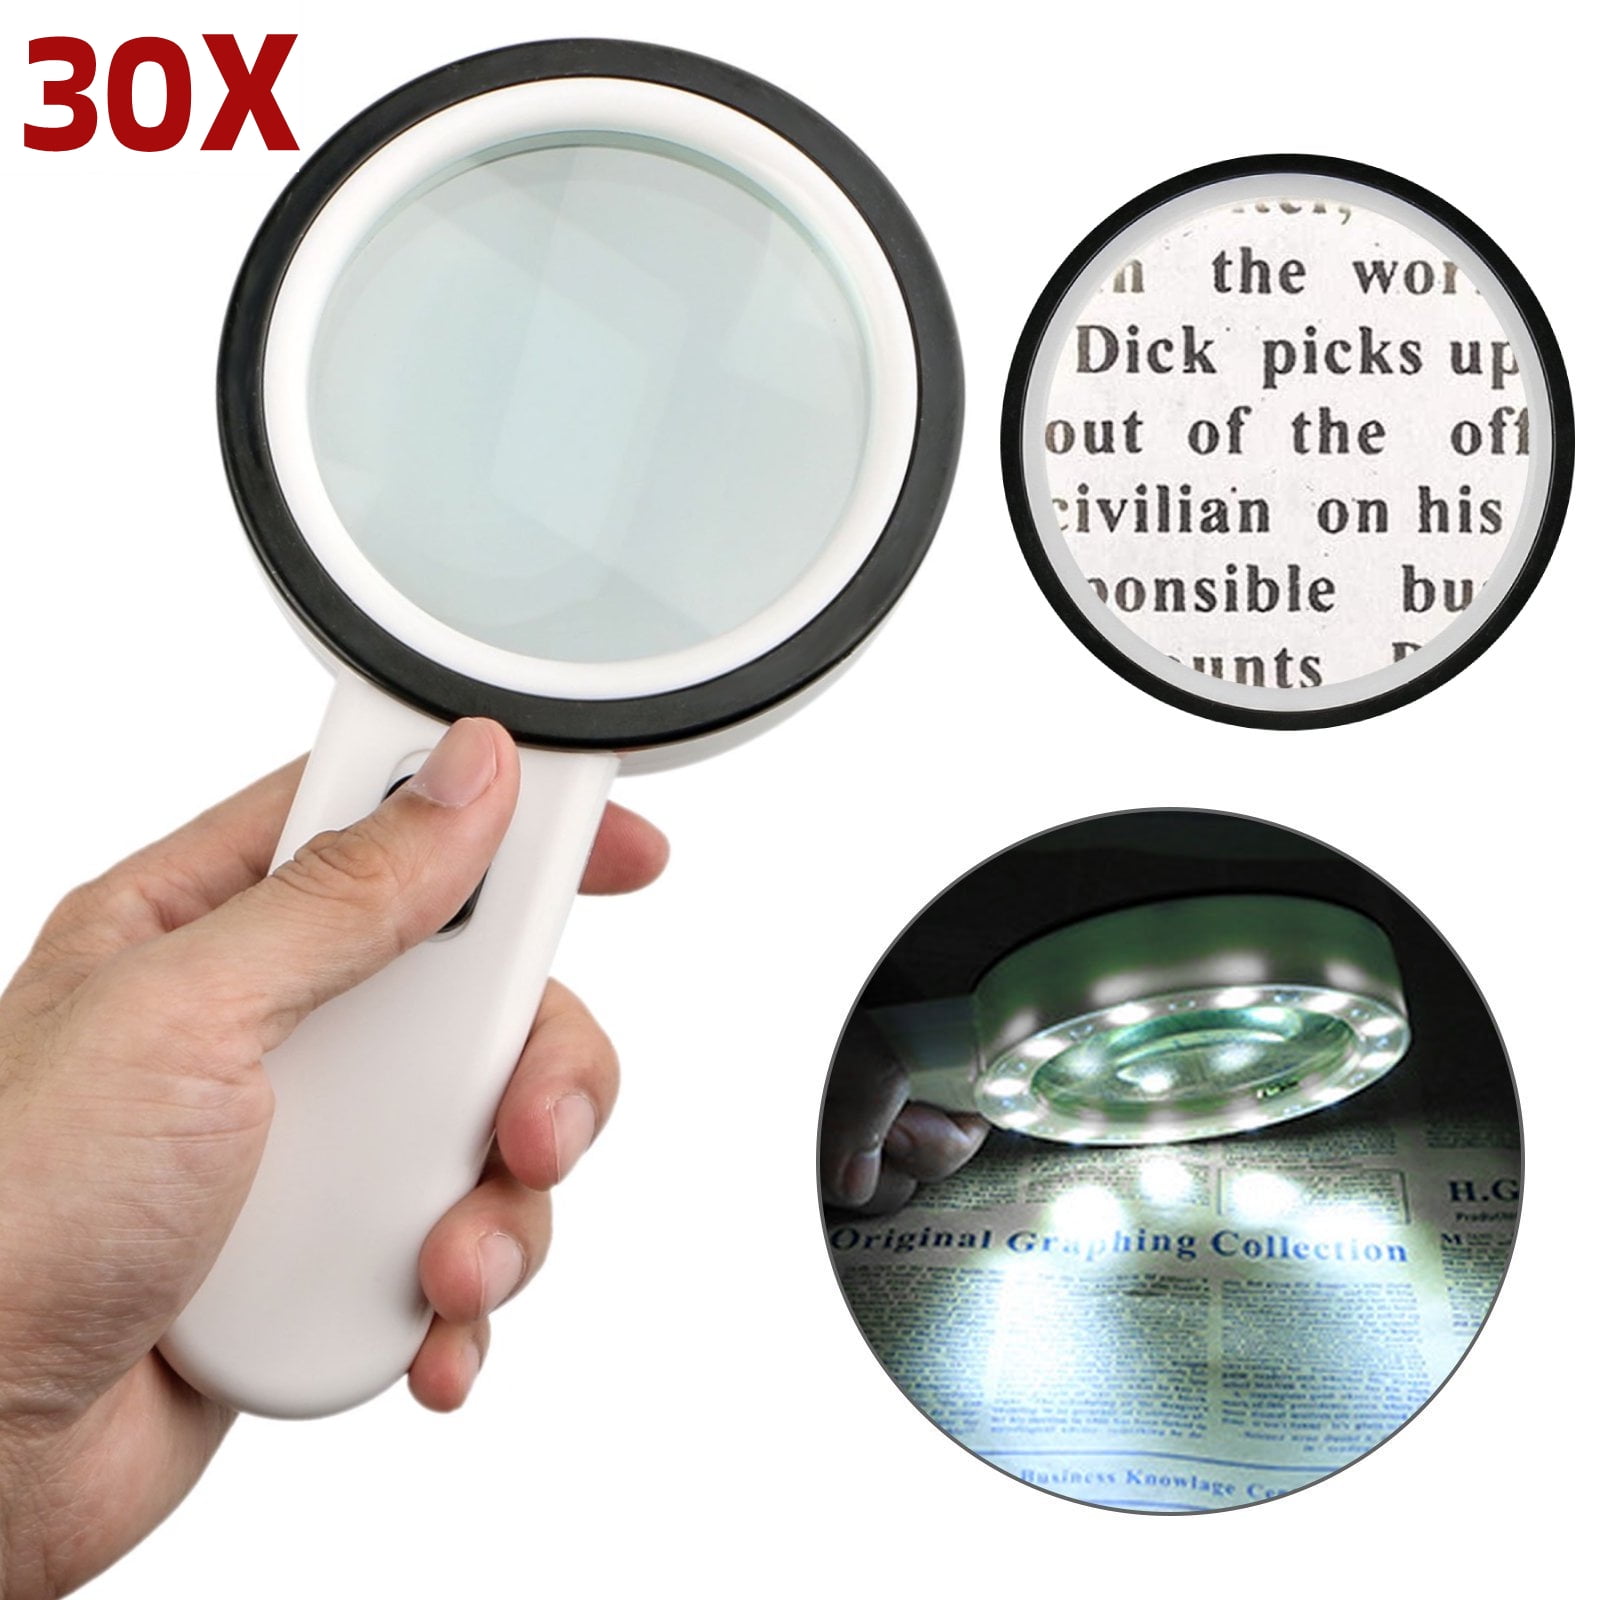 6X Bifocal Lens Anti-Glare Magnifying Glass For Newspaper & Books L23xW8xD4cm Includes Cleaning Cloth & Protective Pouch Easylife Lifestyle Solutions Illuminated Anti-Glare Magnifier Lens